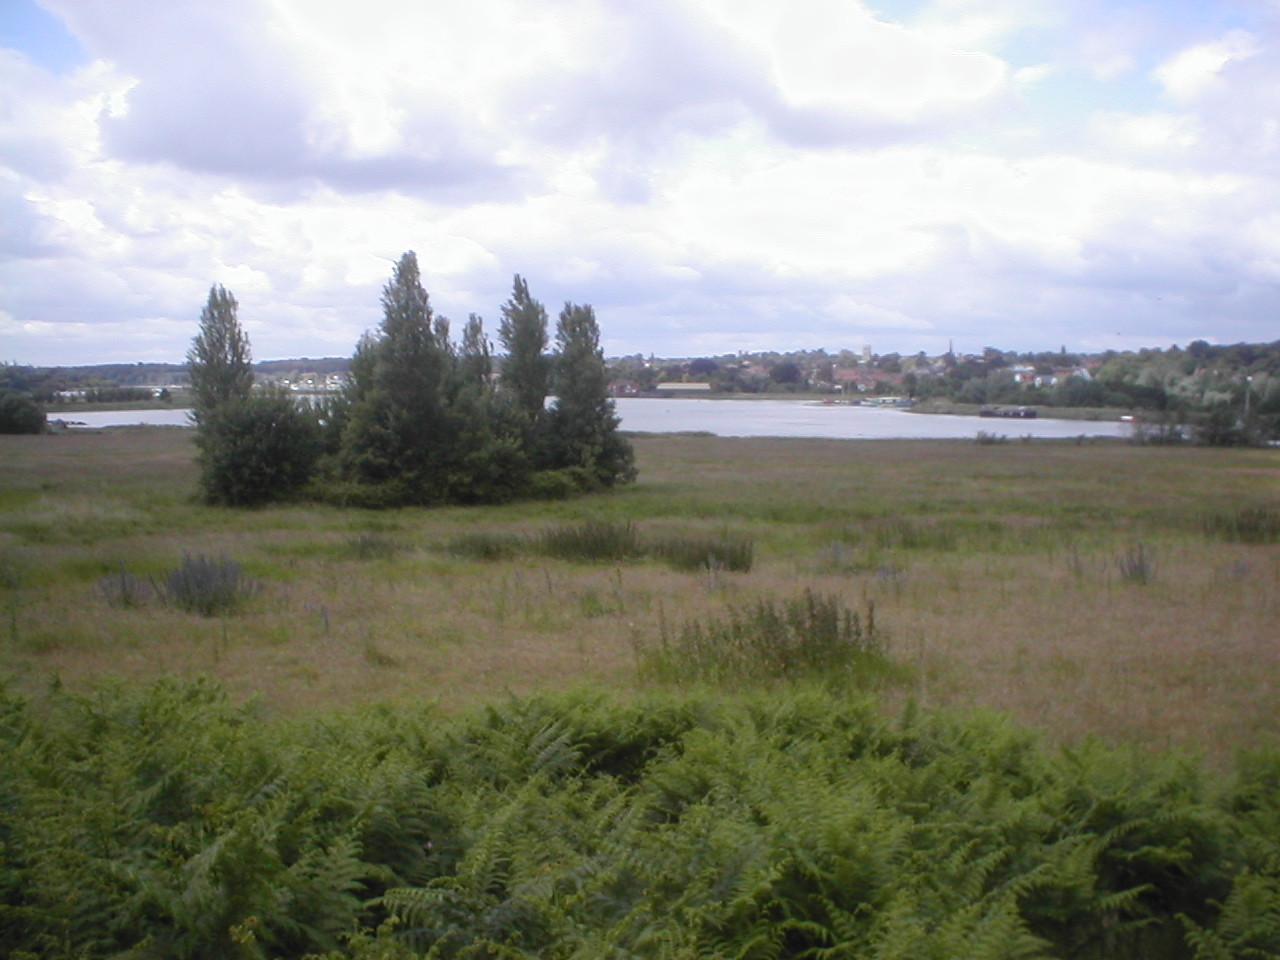 The estuary, just below the site